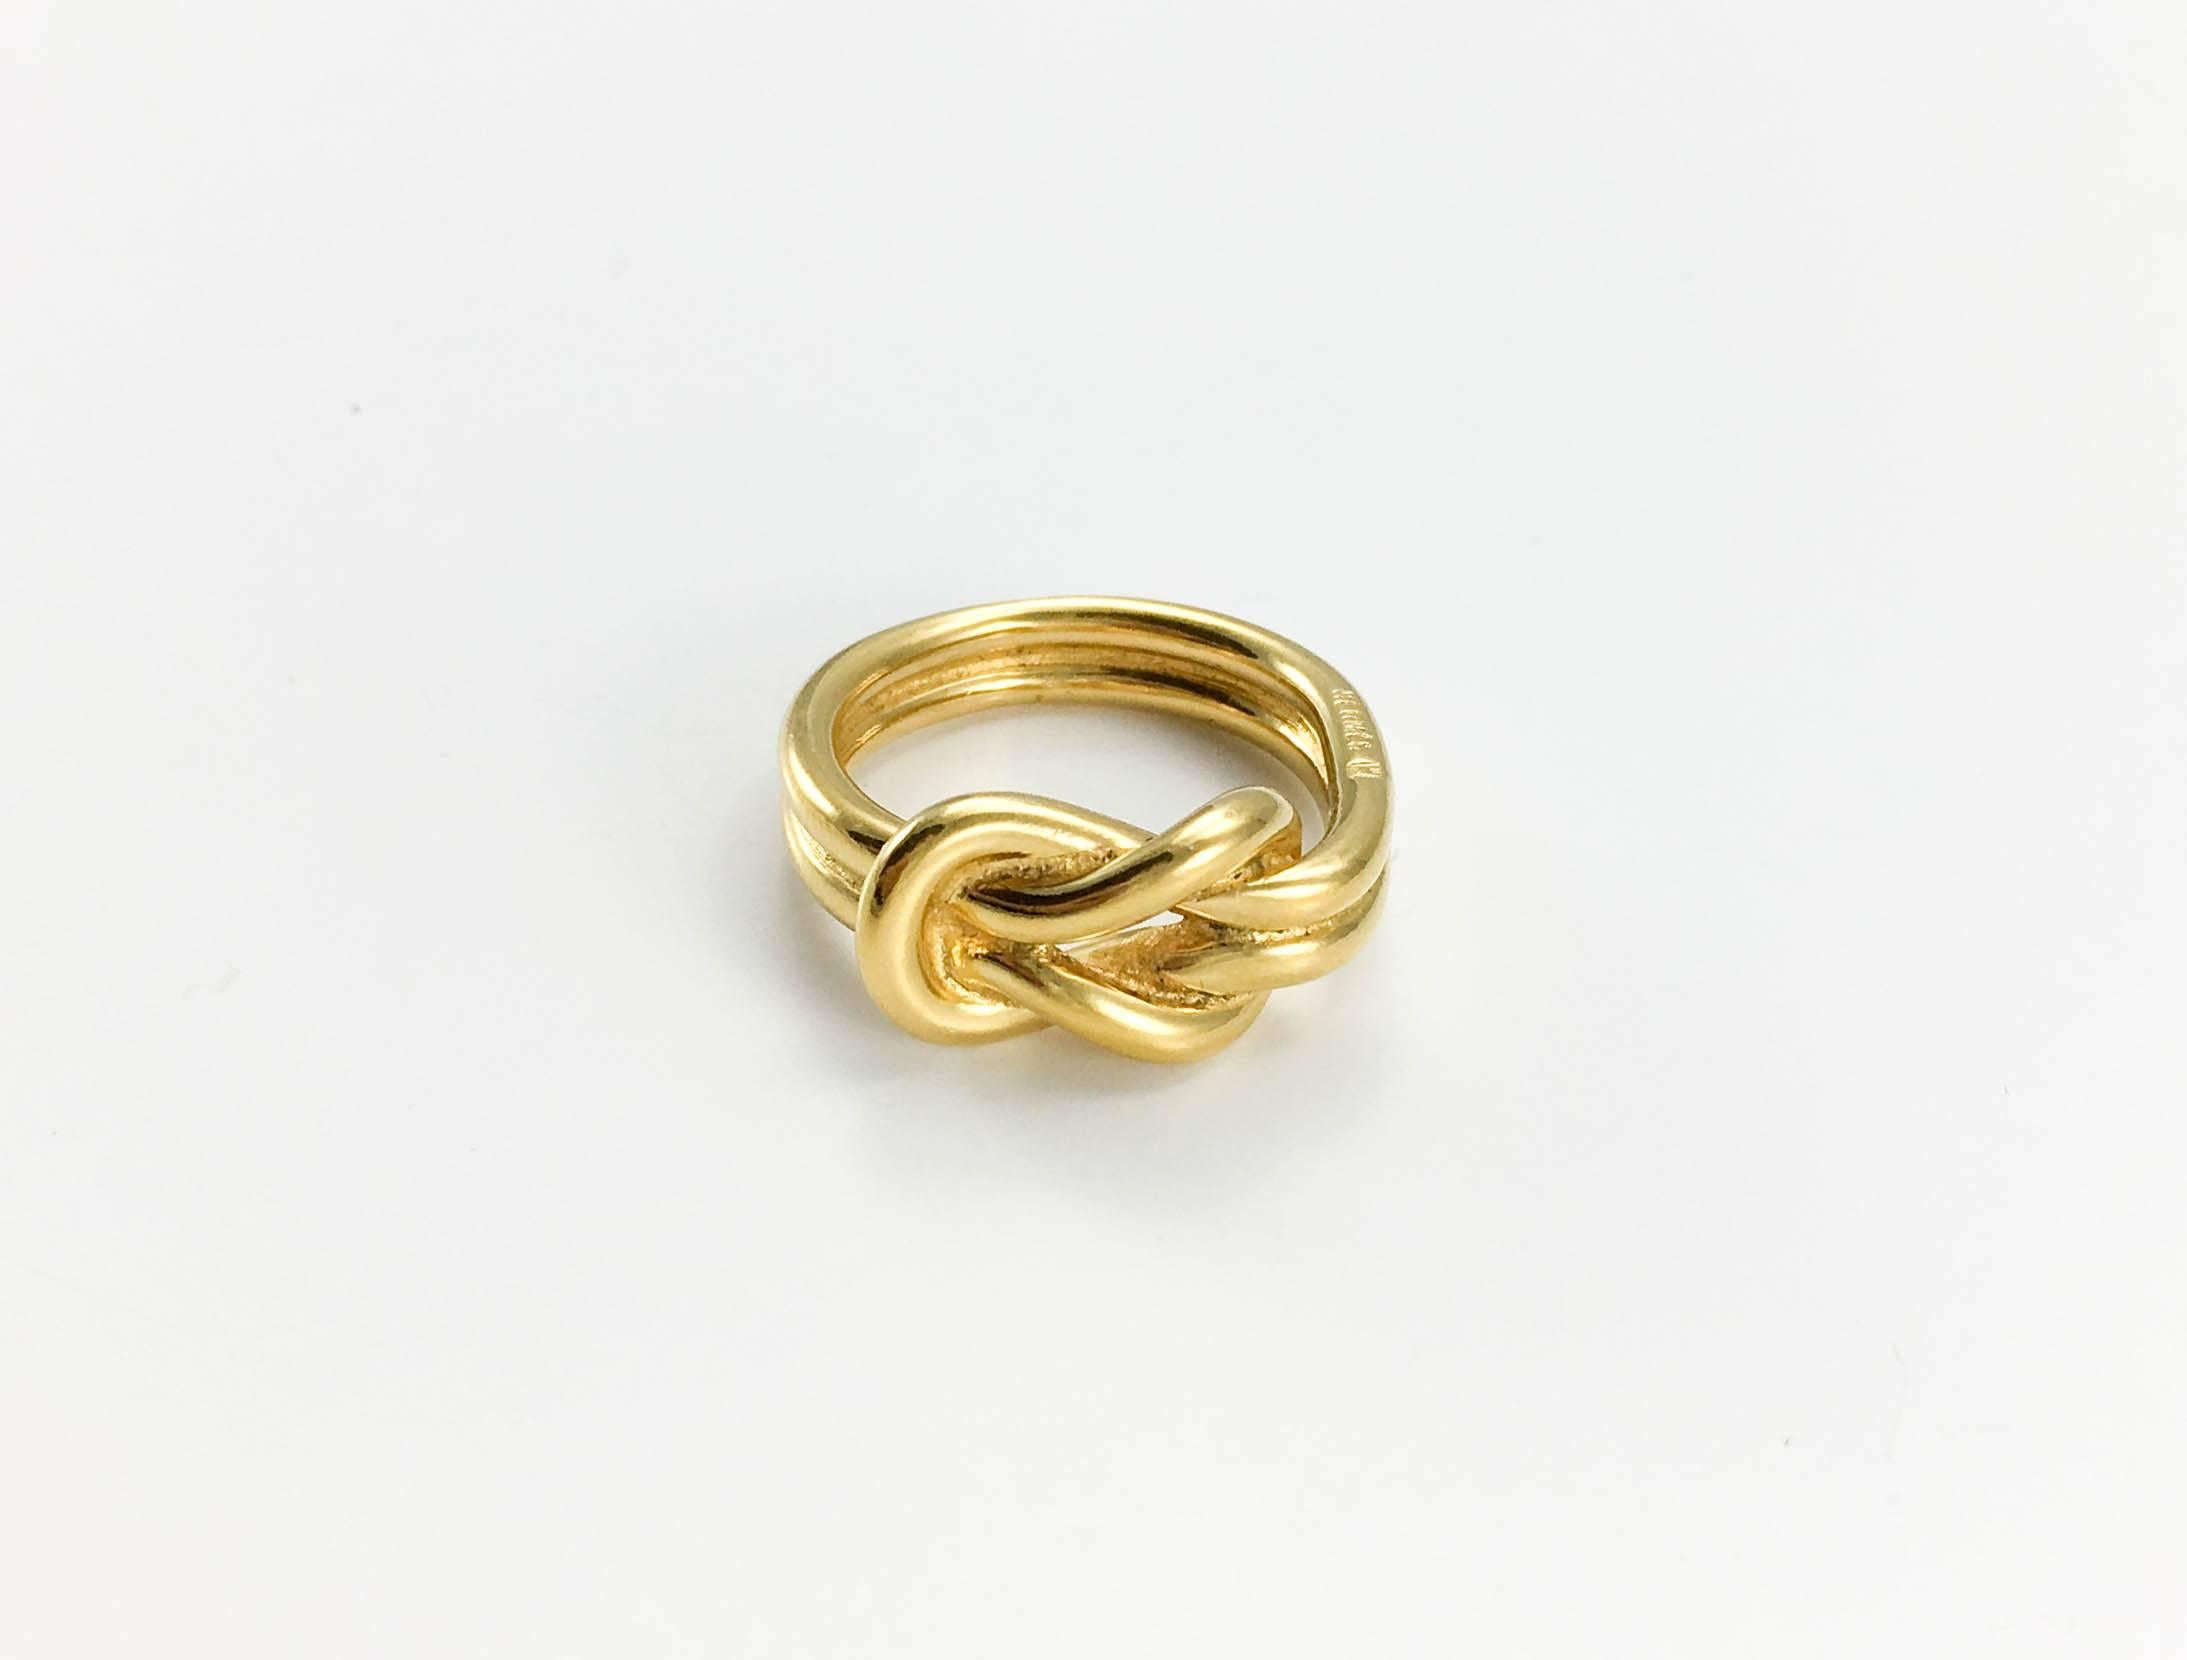 Beige Hermes Gold-Tone 'Knotted' Scarf Ring